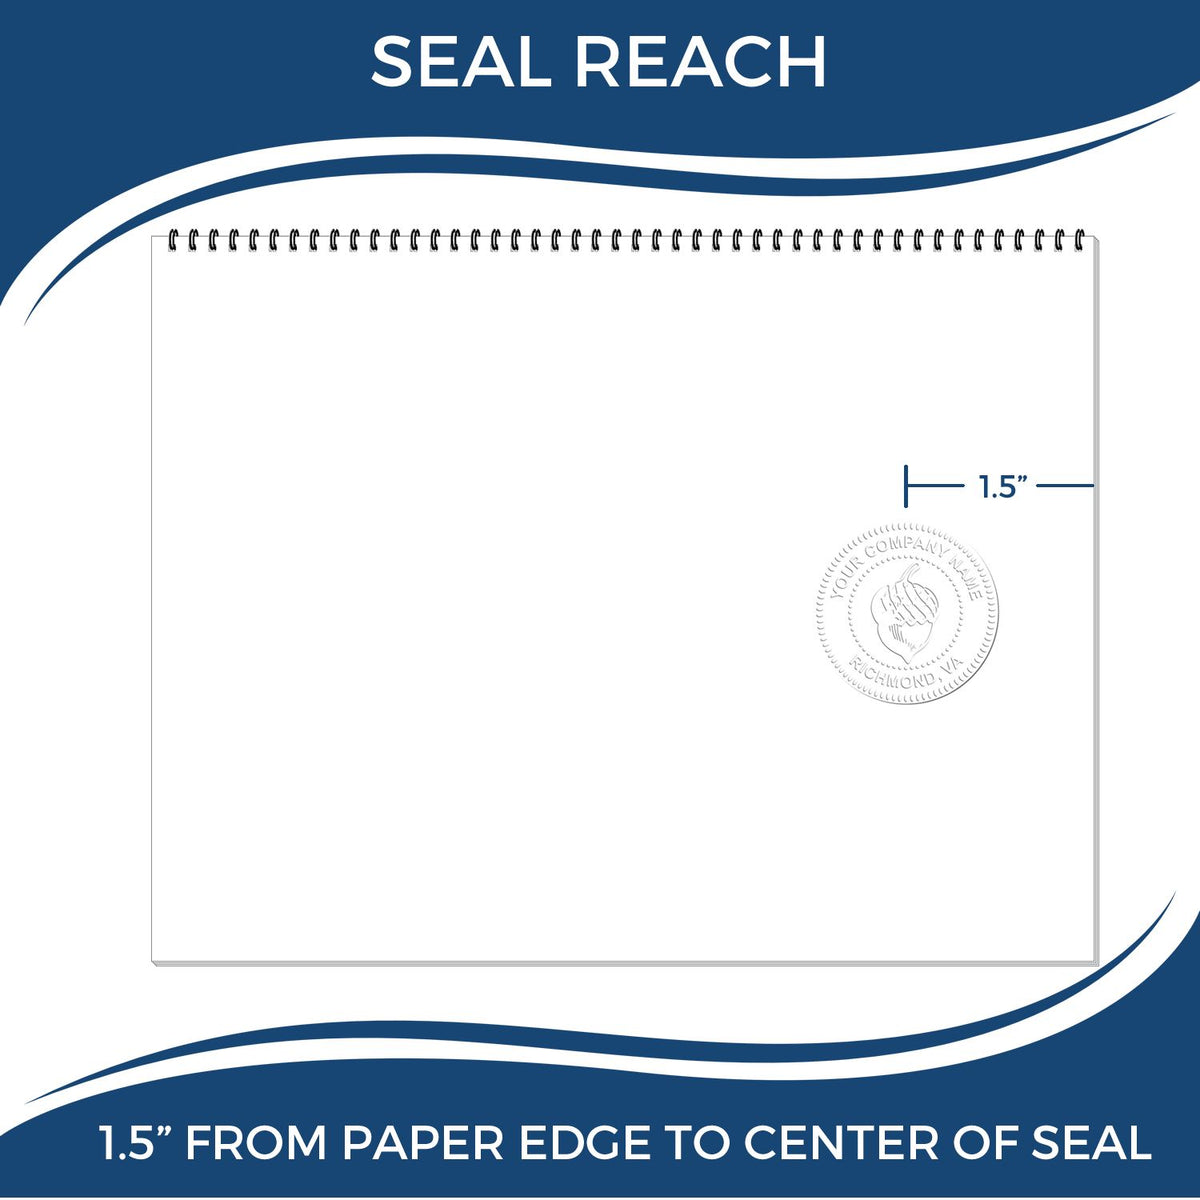 An infographic showing the seal reach which is represented by a ruler and a miniature seal image of the Hybrid Washington Engineer Seal